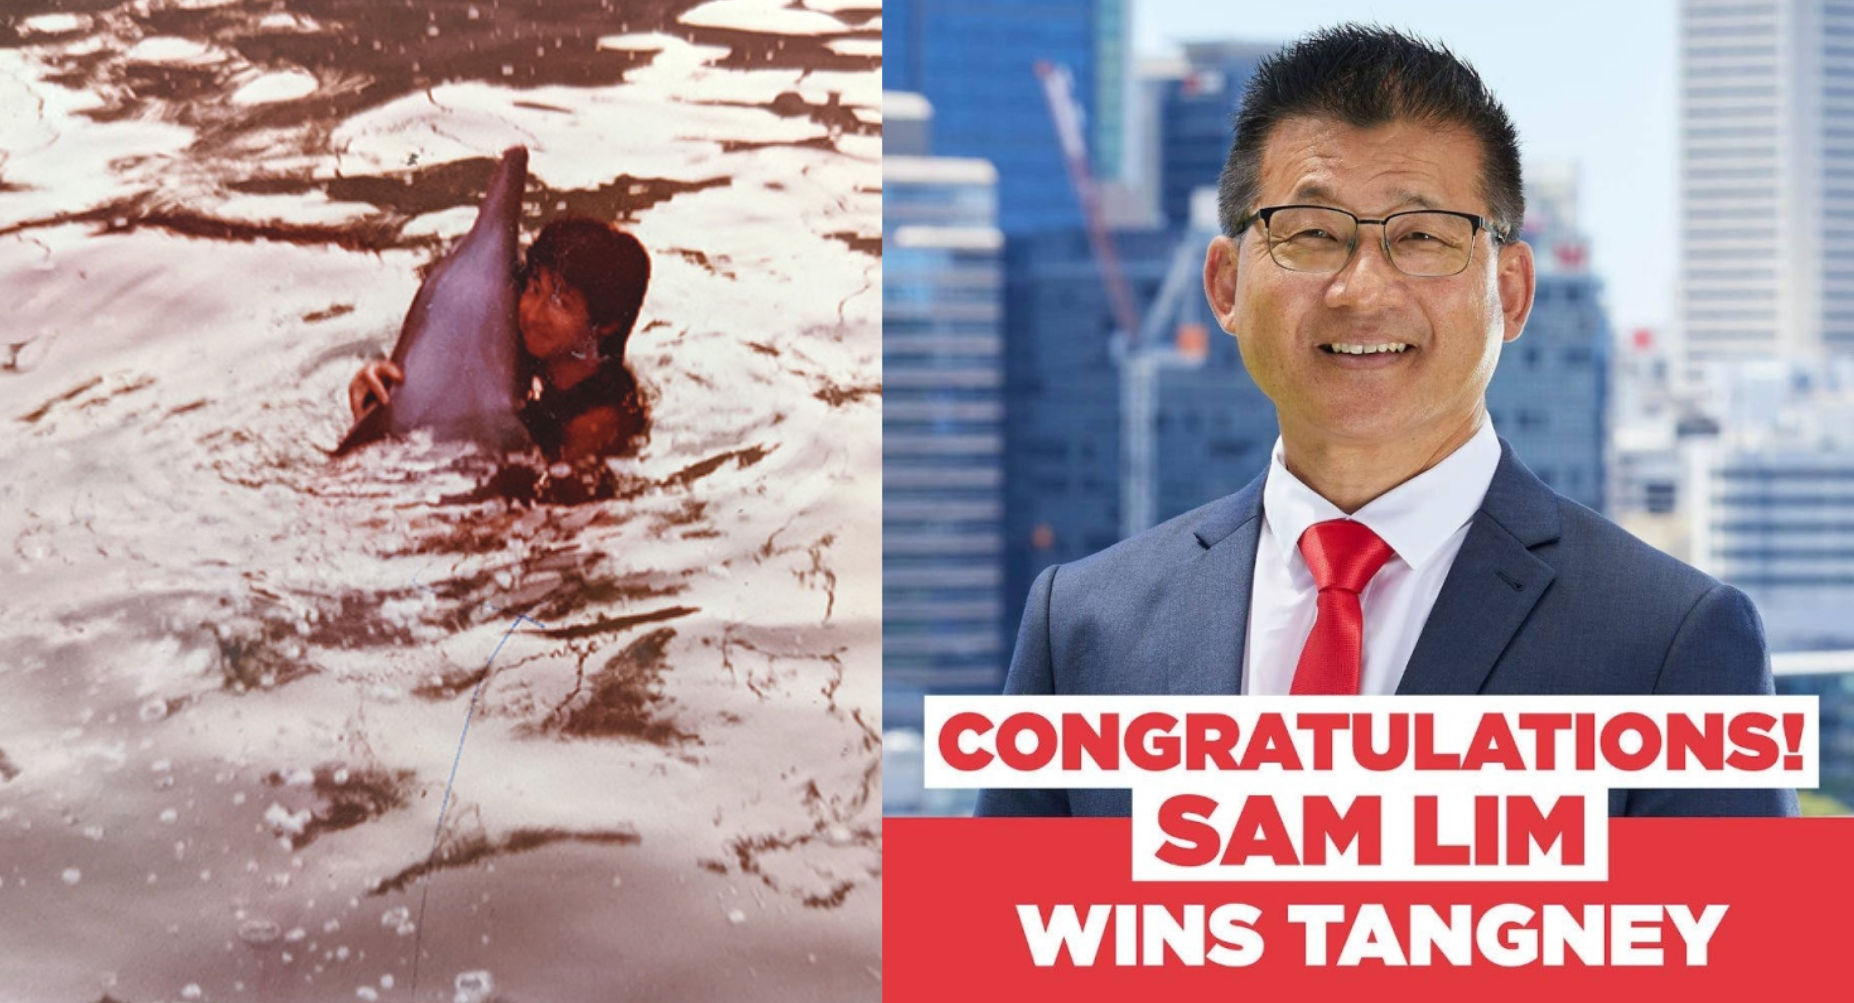 Sam Lim is now the second Malaysian born MP and it shows the diversity in the Australian Parliament. 